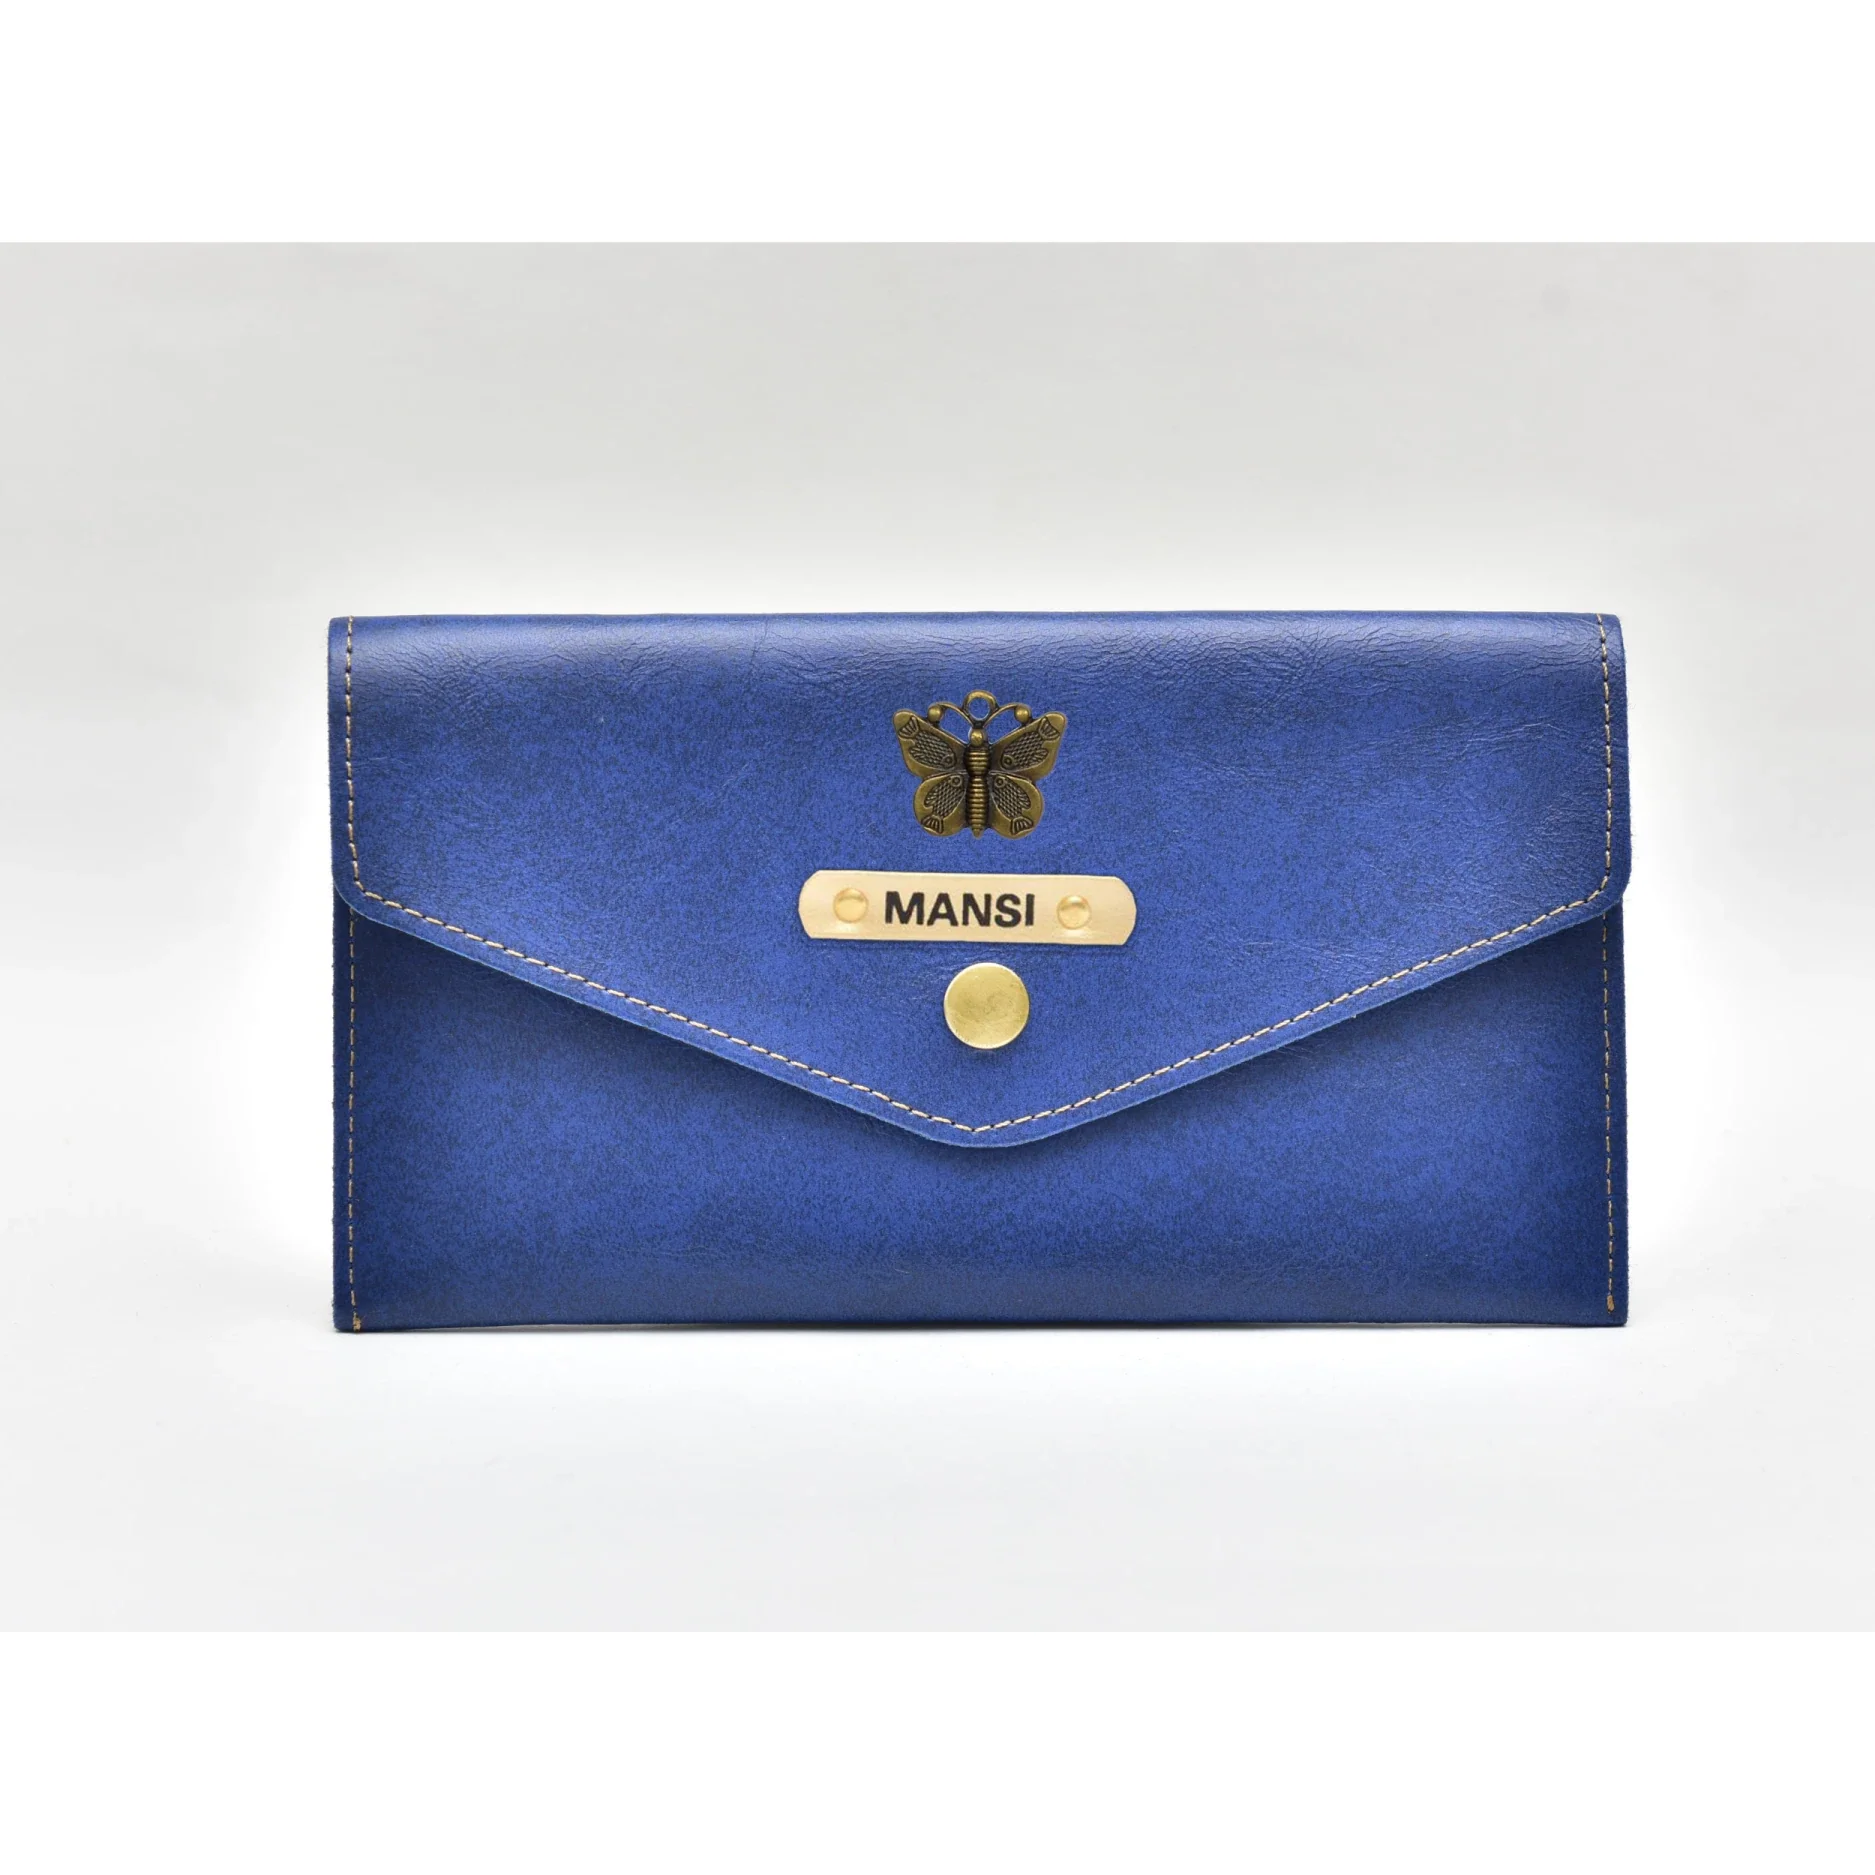 Make a statement with this personalized leather clutch, featuring a unique design of your choice. Perfect for a night out or special occasion.